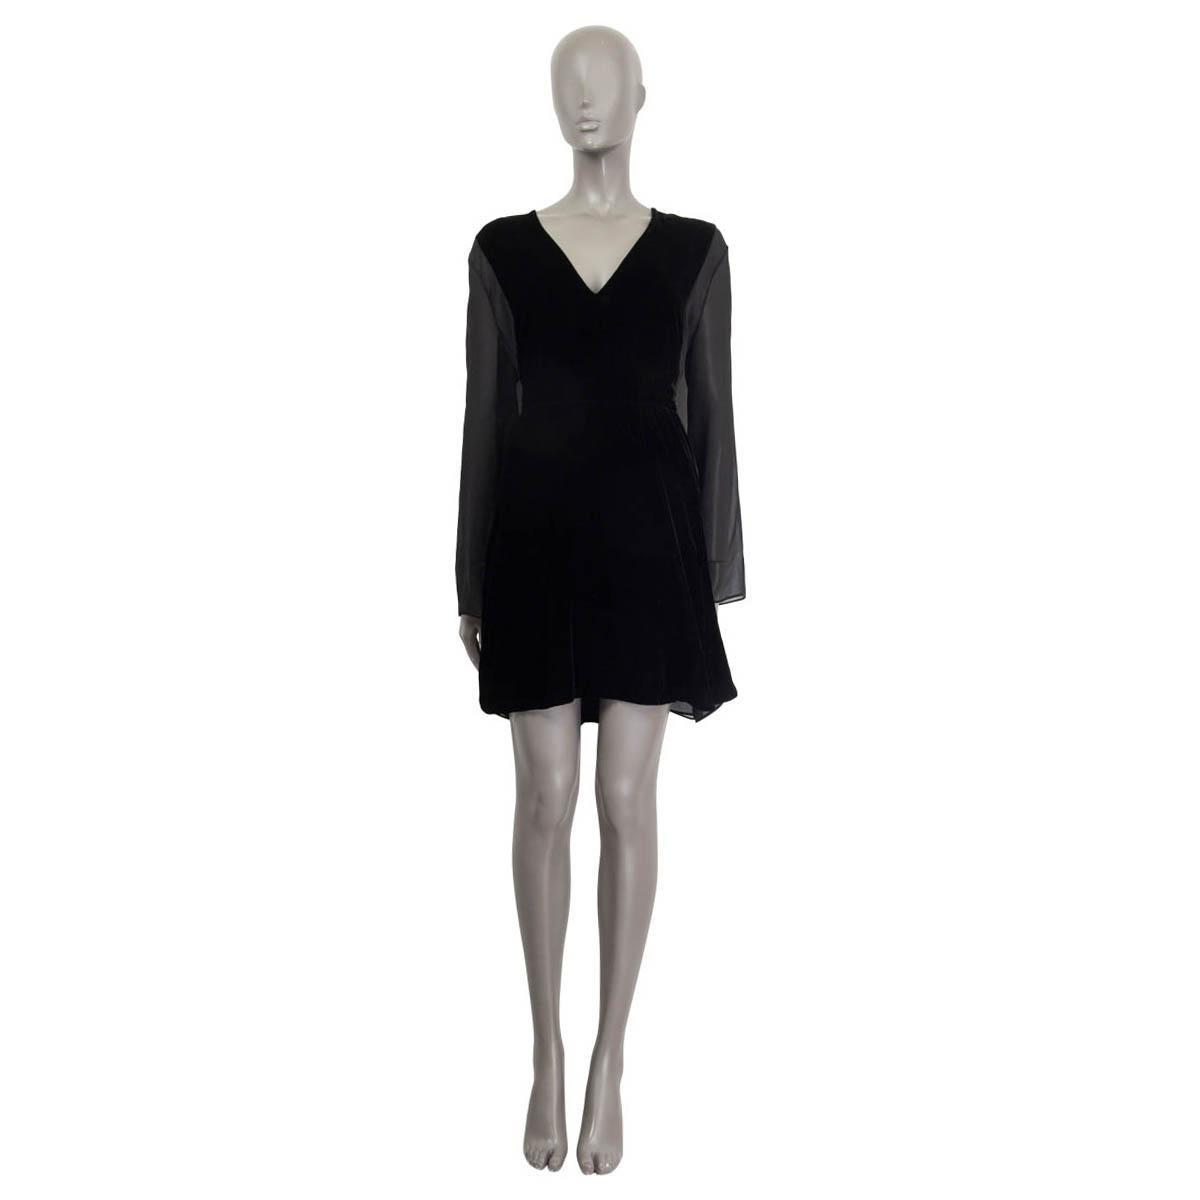 100% authentic Chloé long sleeve dress in black viscose (70%) and cupro (30%). Embellished sheer panels on the sides and sheer sleeves. Opens with three three strings on the front. Lined in black polyester (100%). Has a small hole on the right